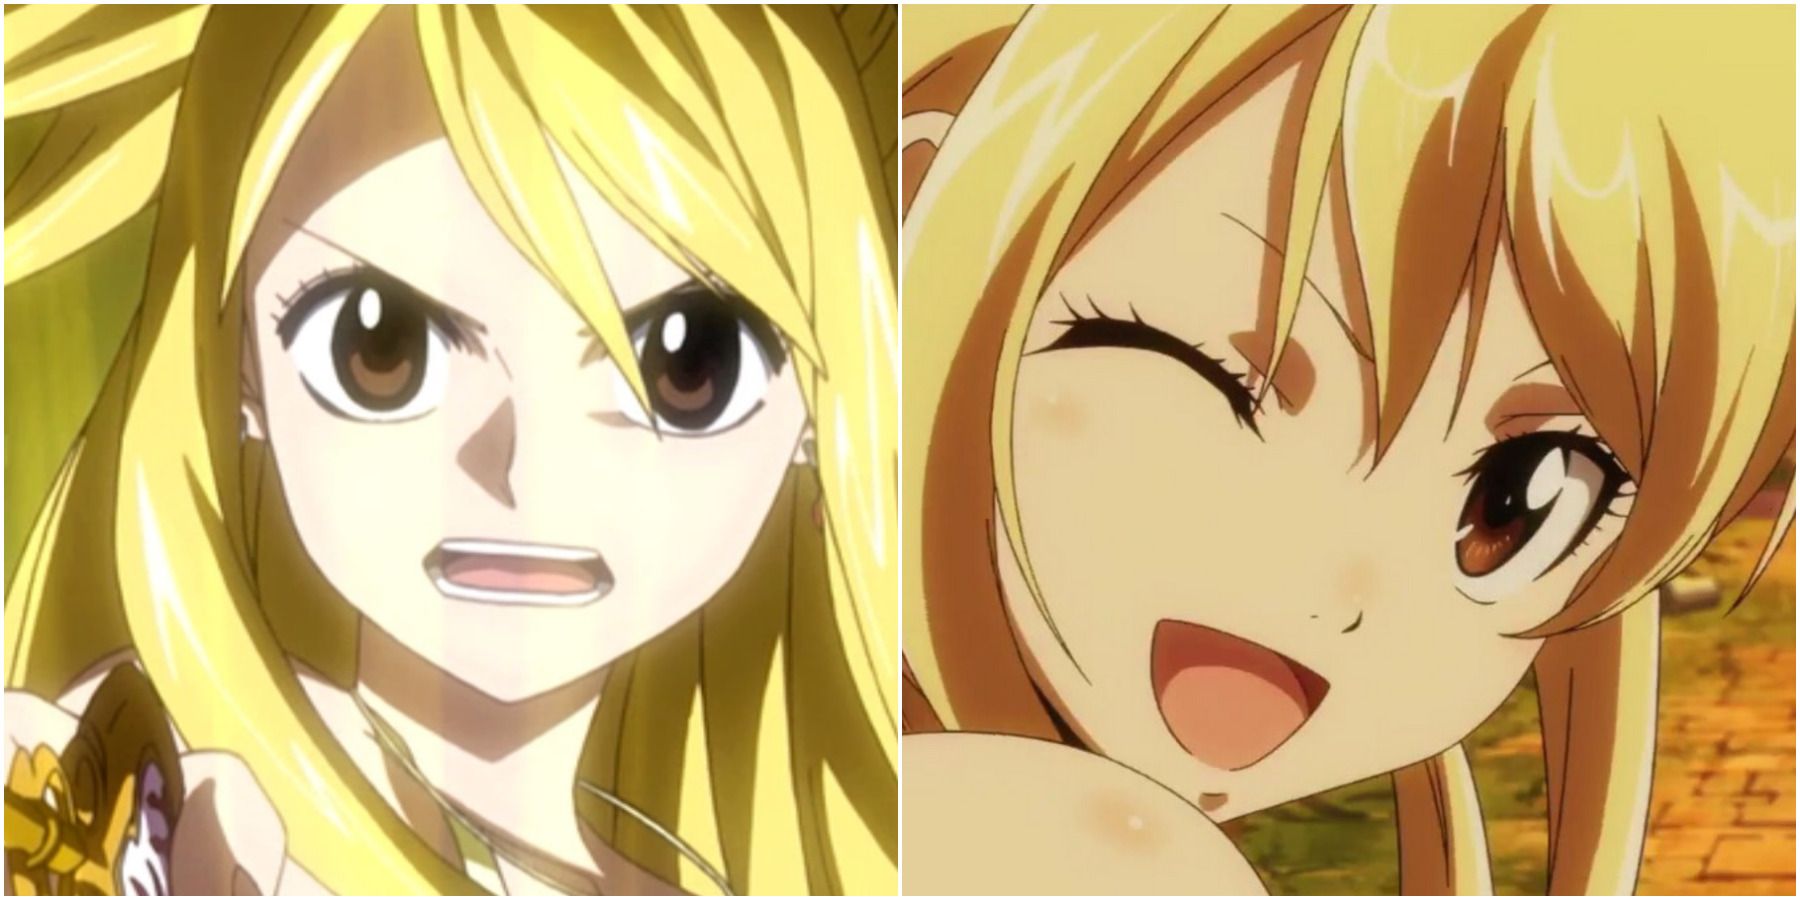 Fairy Tail: Lucy's 10 Best Moves, Ranked According To Strength